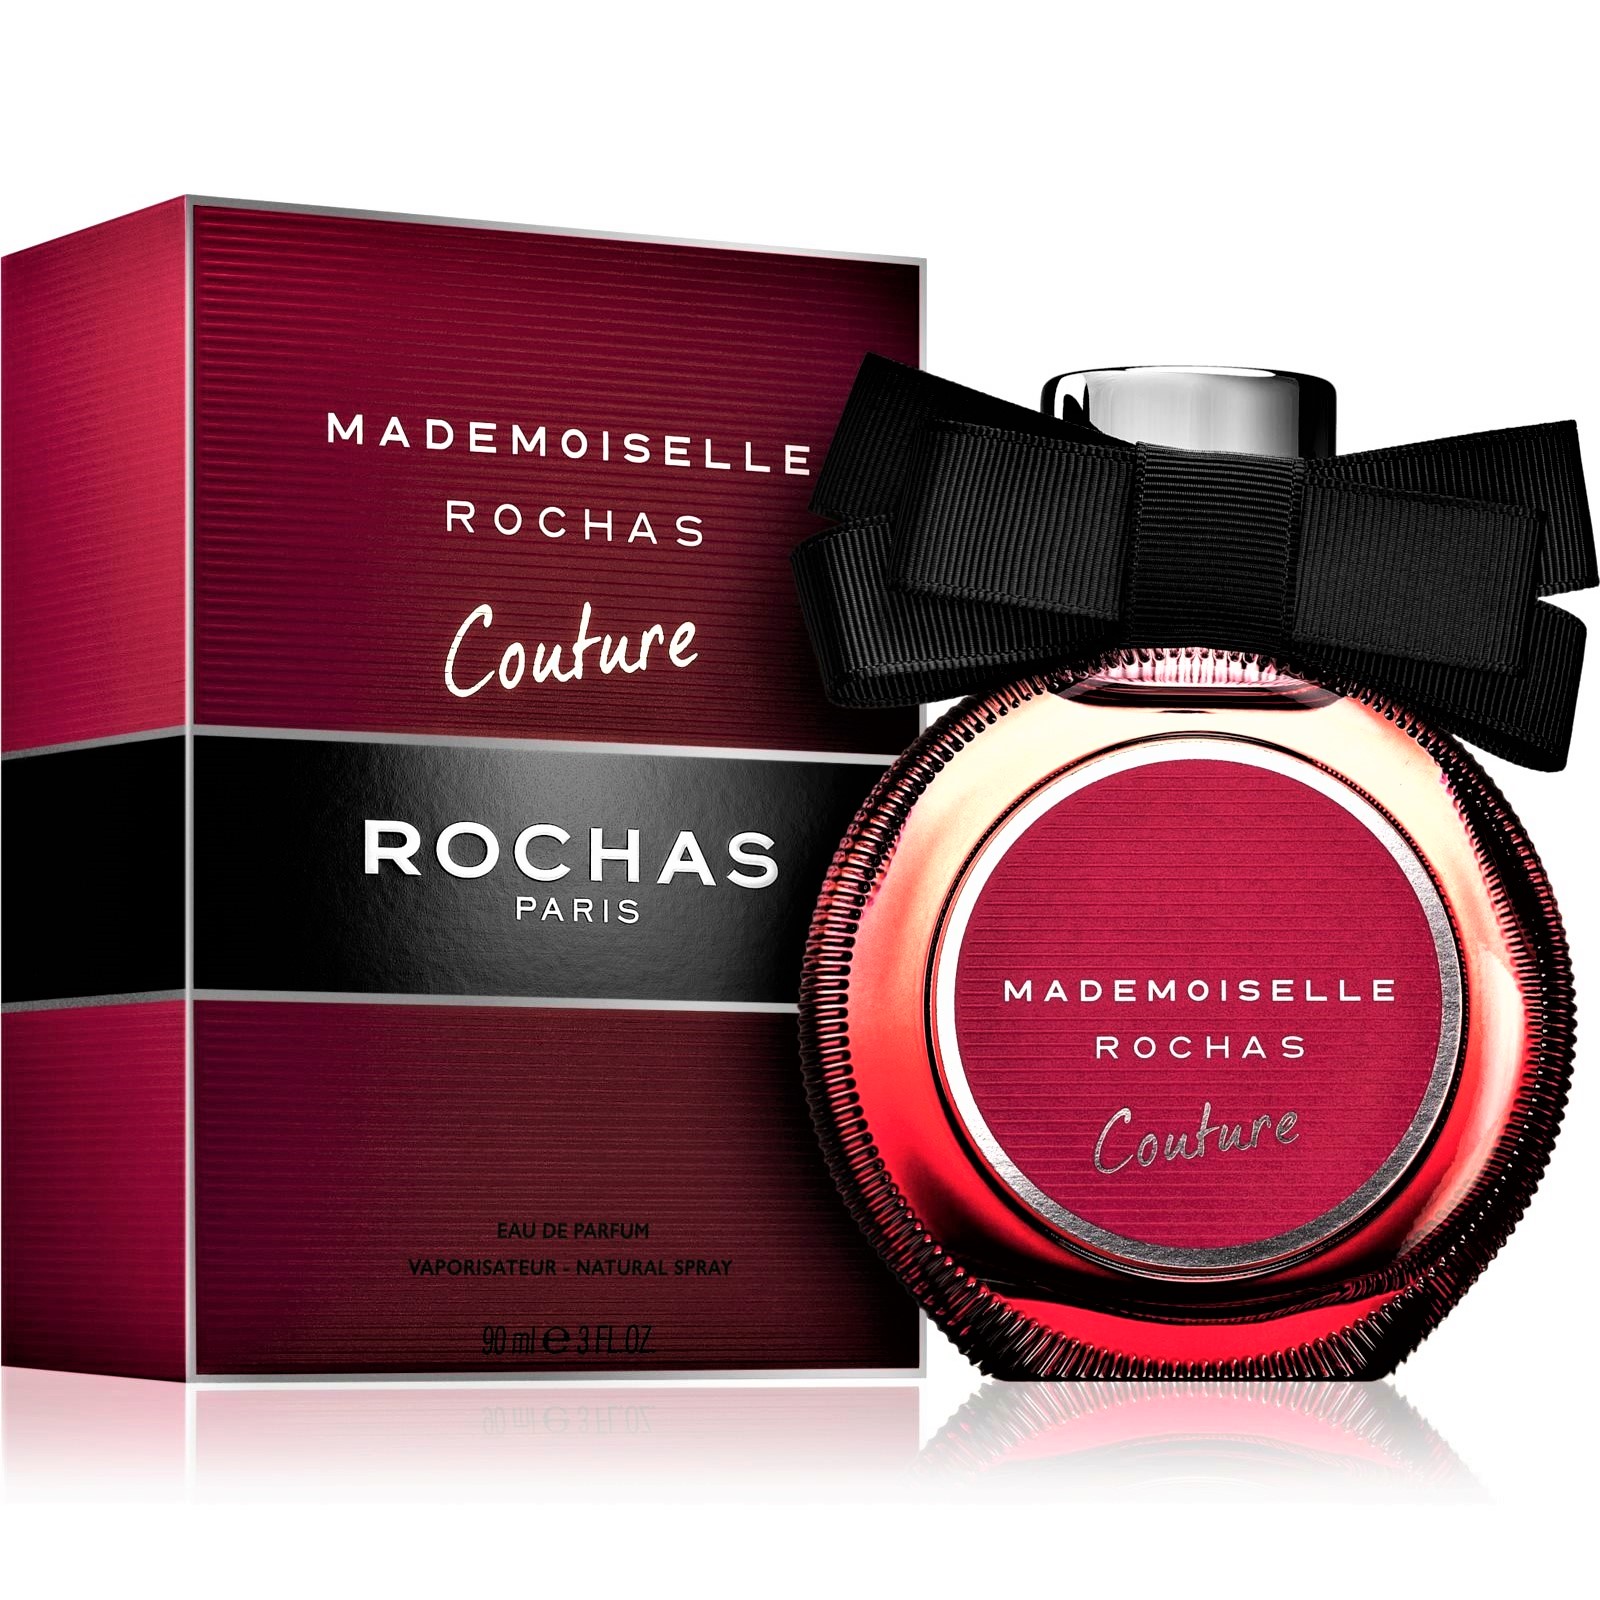 ROCHAS MADEMOISELLE ROCHAS Couture